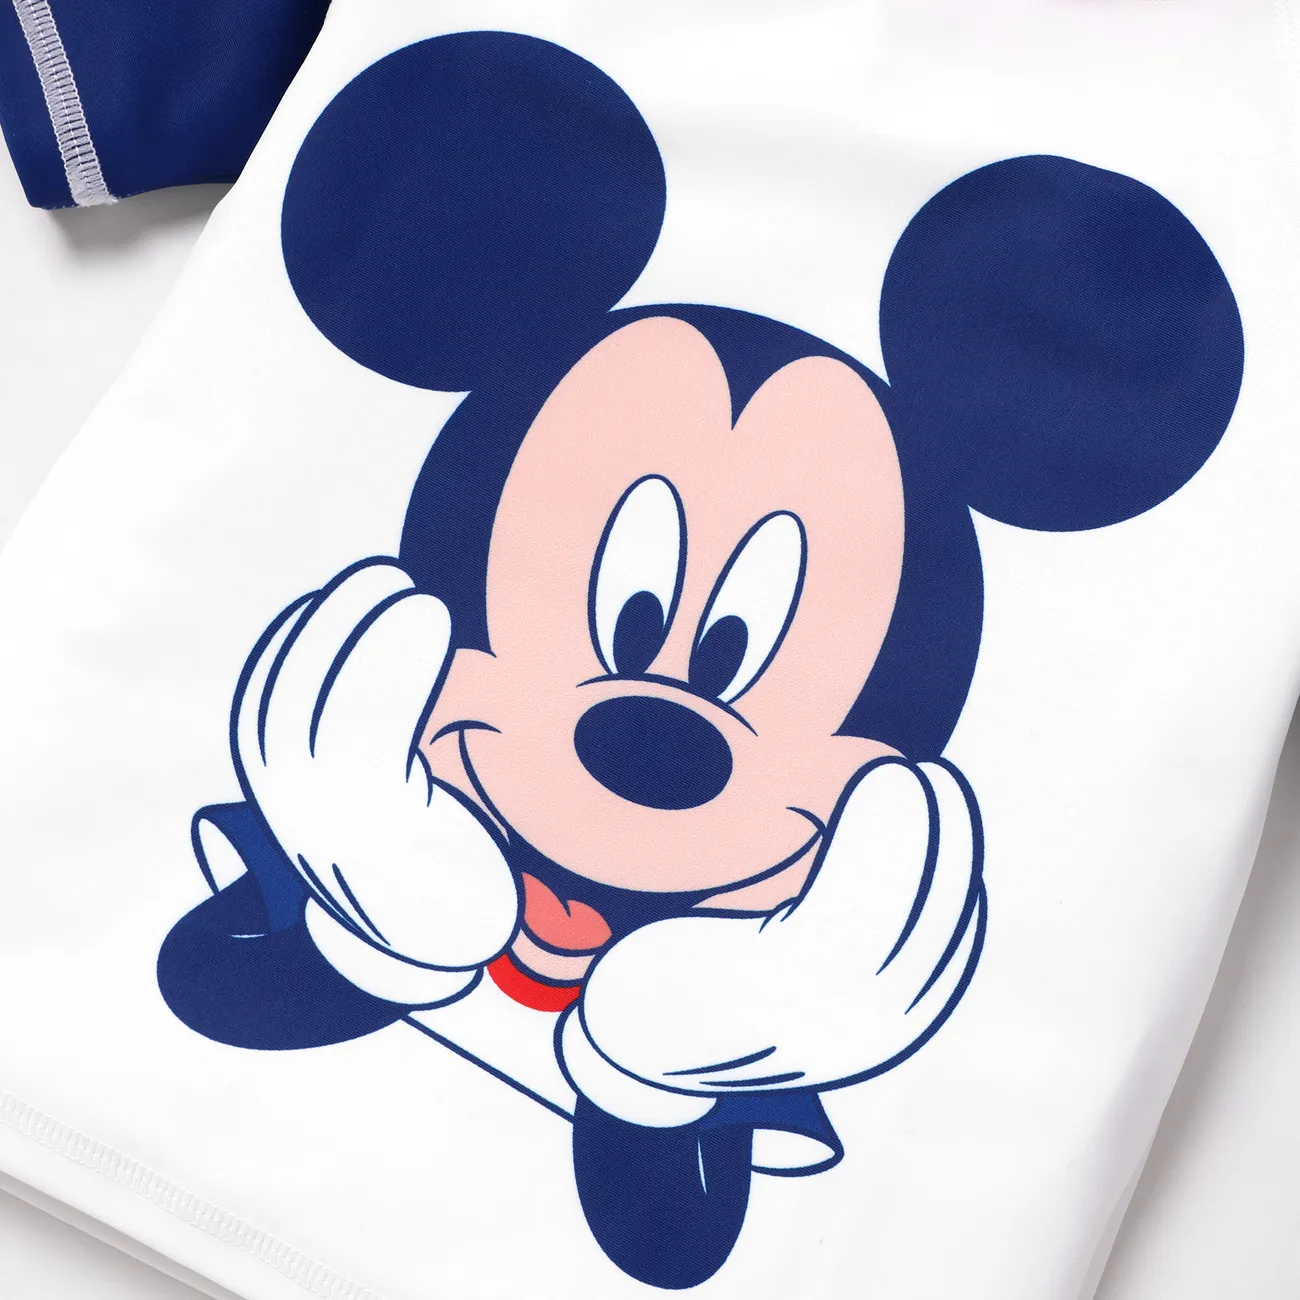 Disney Mickey and Friends Muttertag Geschwister-Outfits Badeanzüge Mehrfarbig big image 1